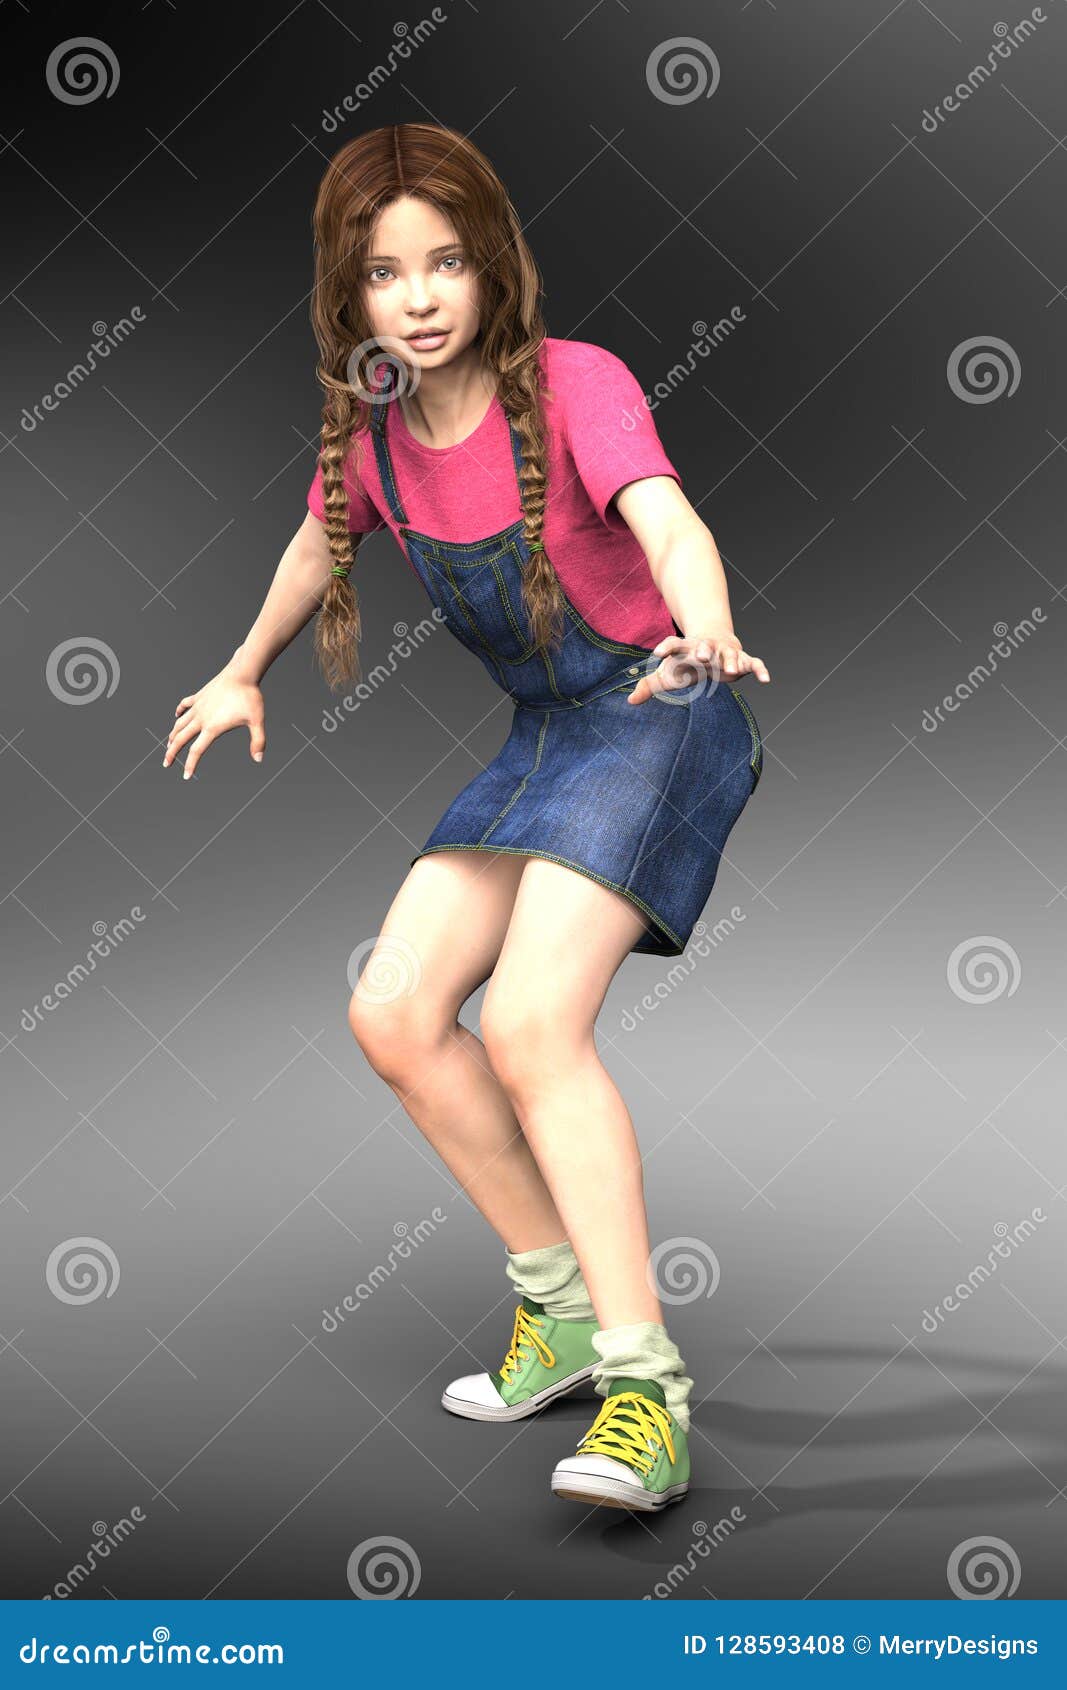 cgi female young teen or child ready to run